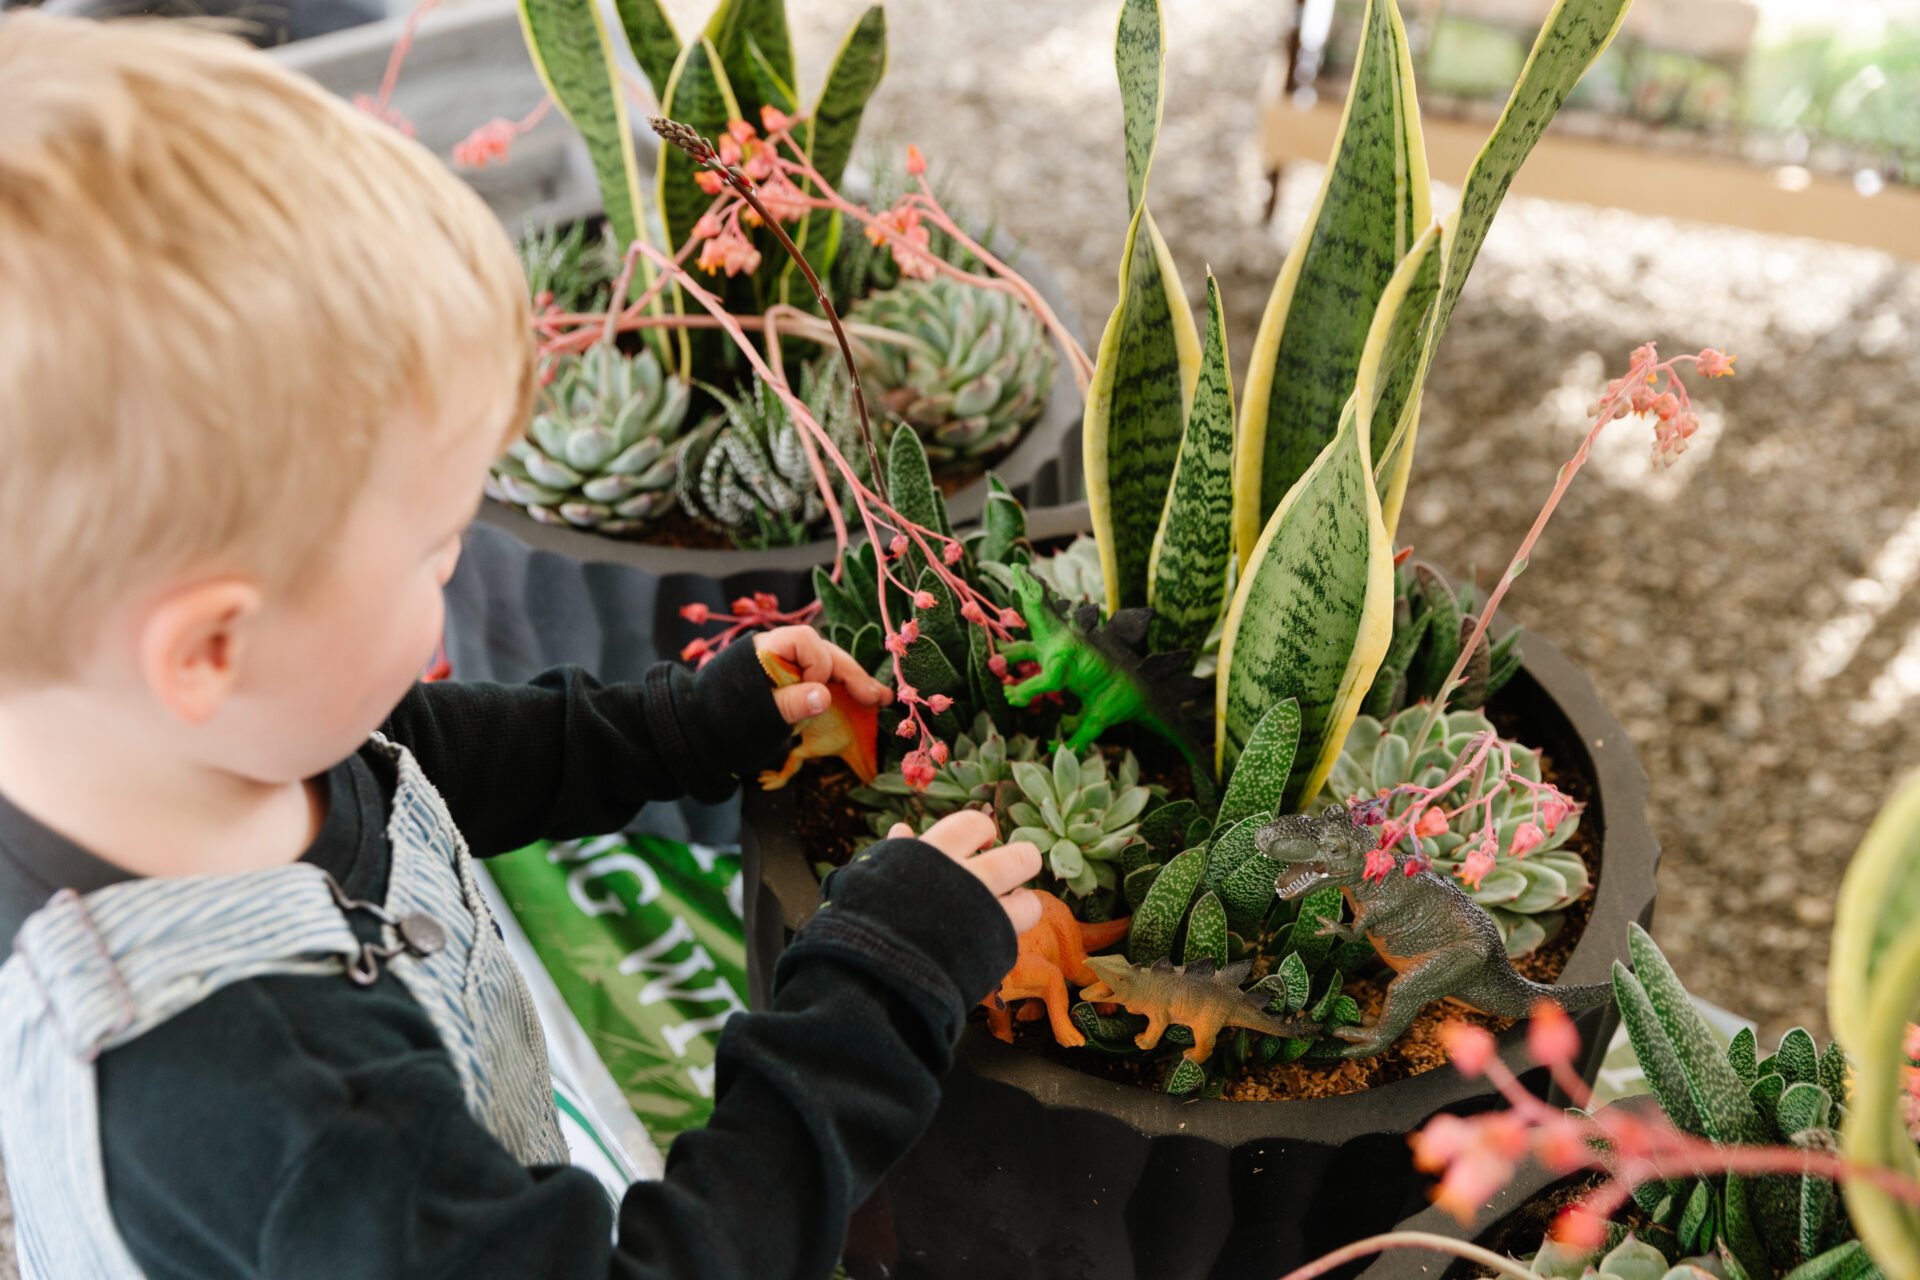 little boy putting dinosaurs into a pot full of plants.